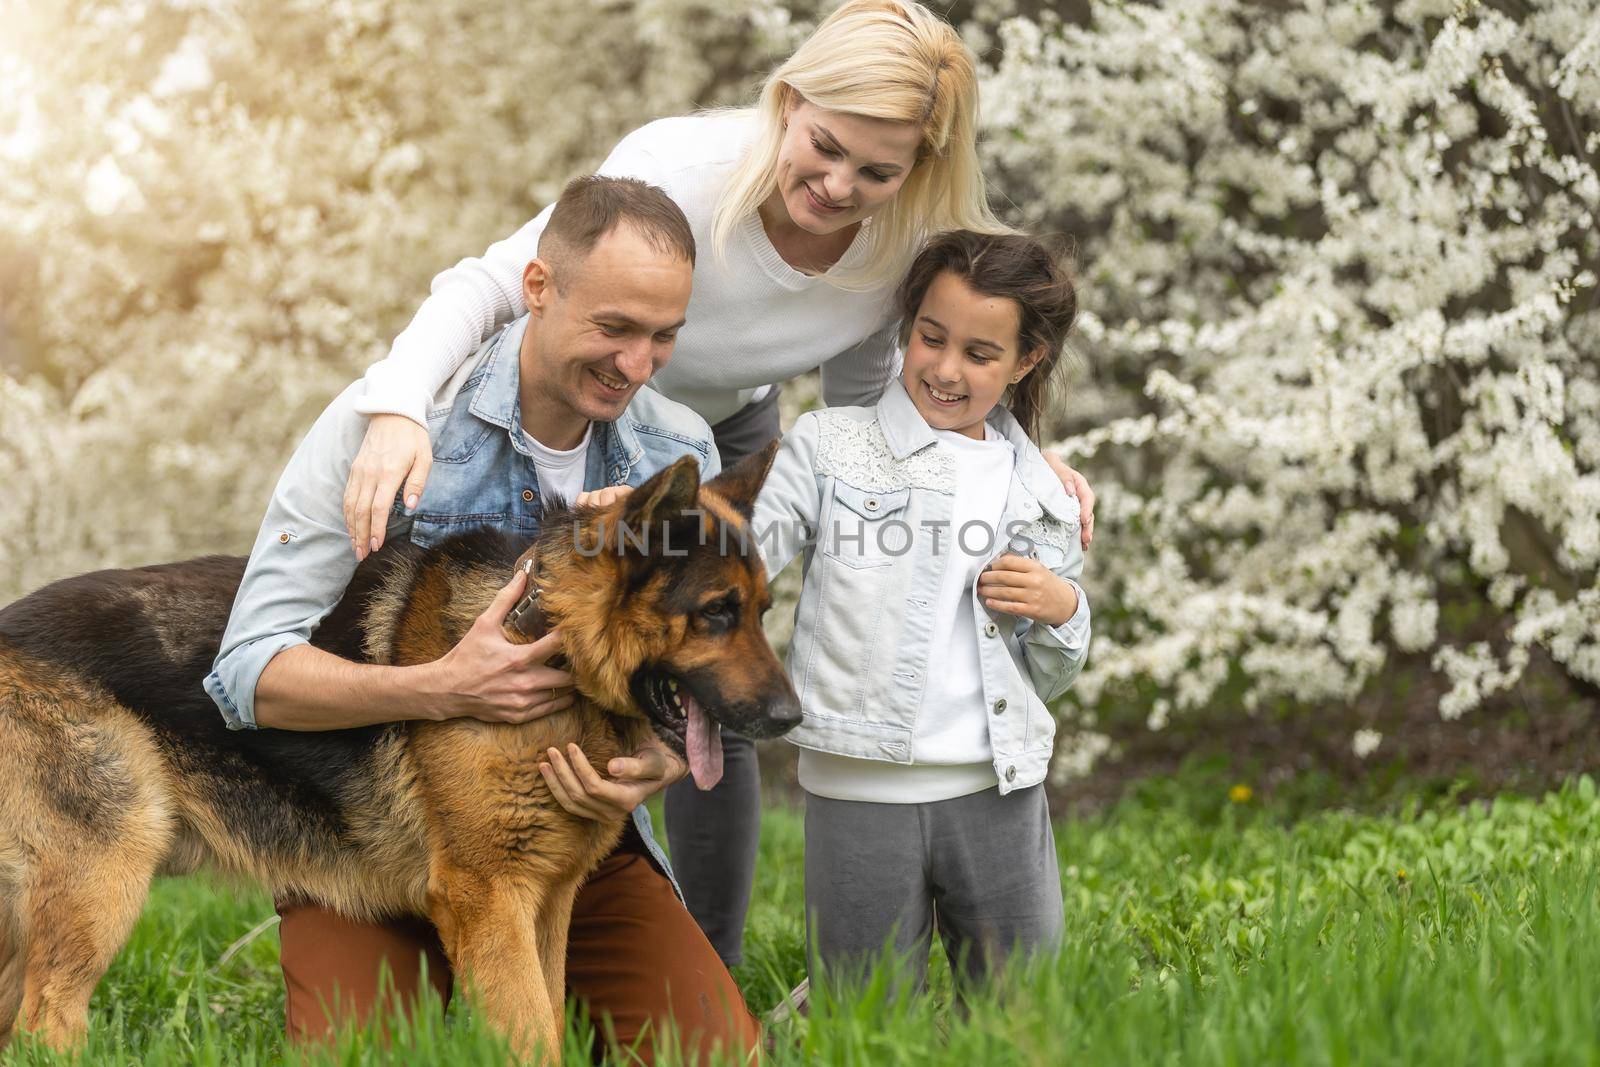 Family and small child outdoors in spring nature, resting